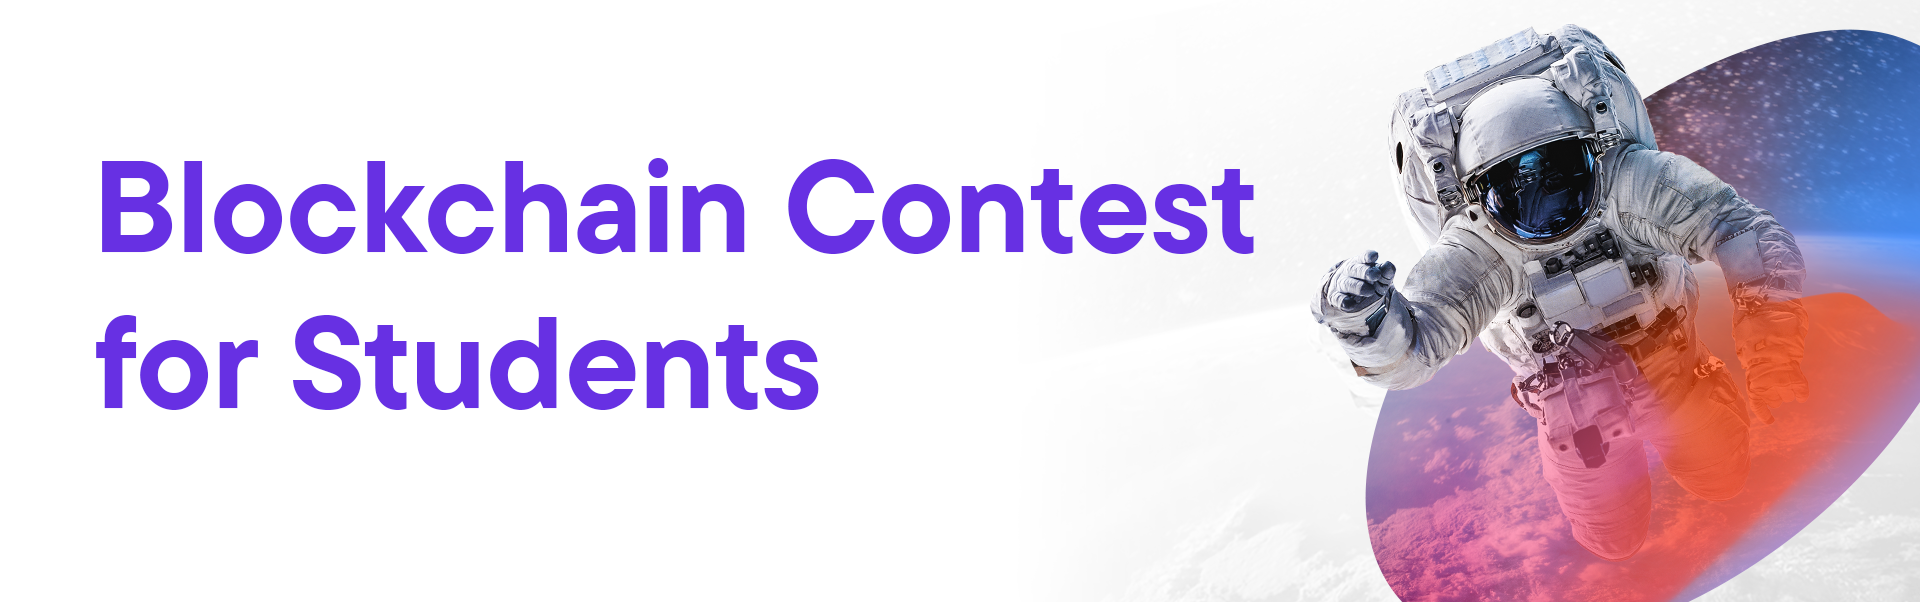 Blockchain contest for students